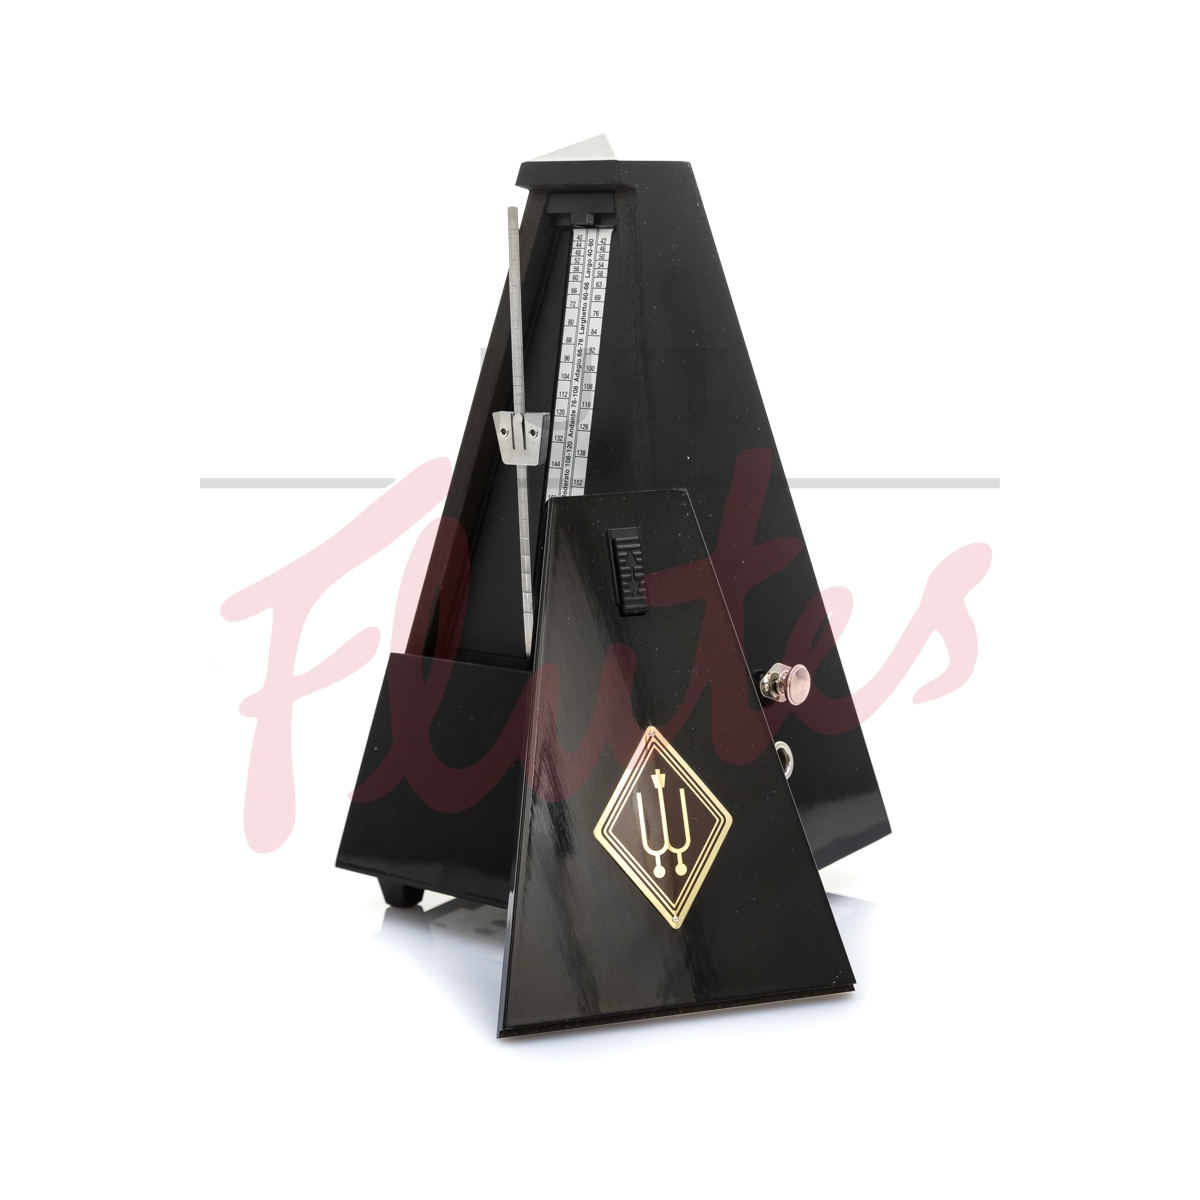 Wittner 816 Pyramid Metronome with Bell, Wood, Highly Polished Black Finish